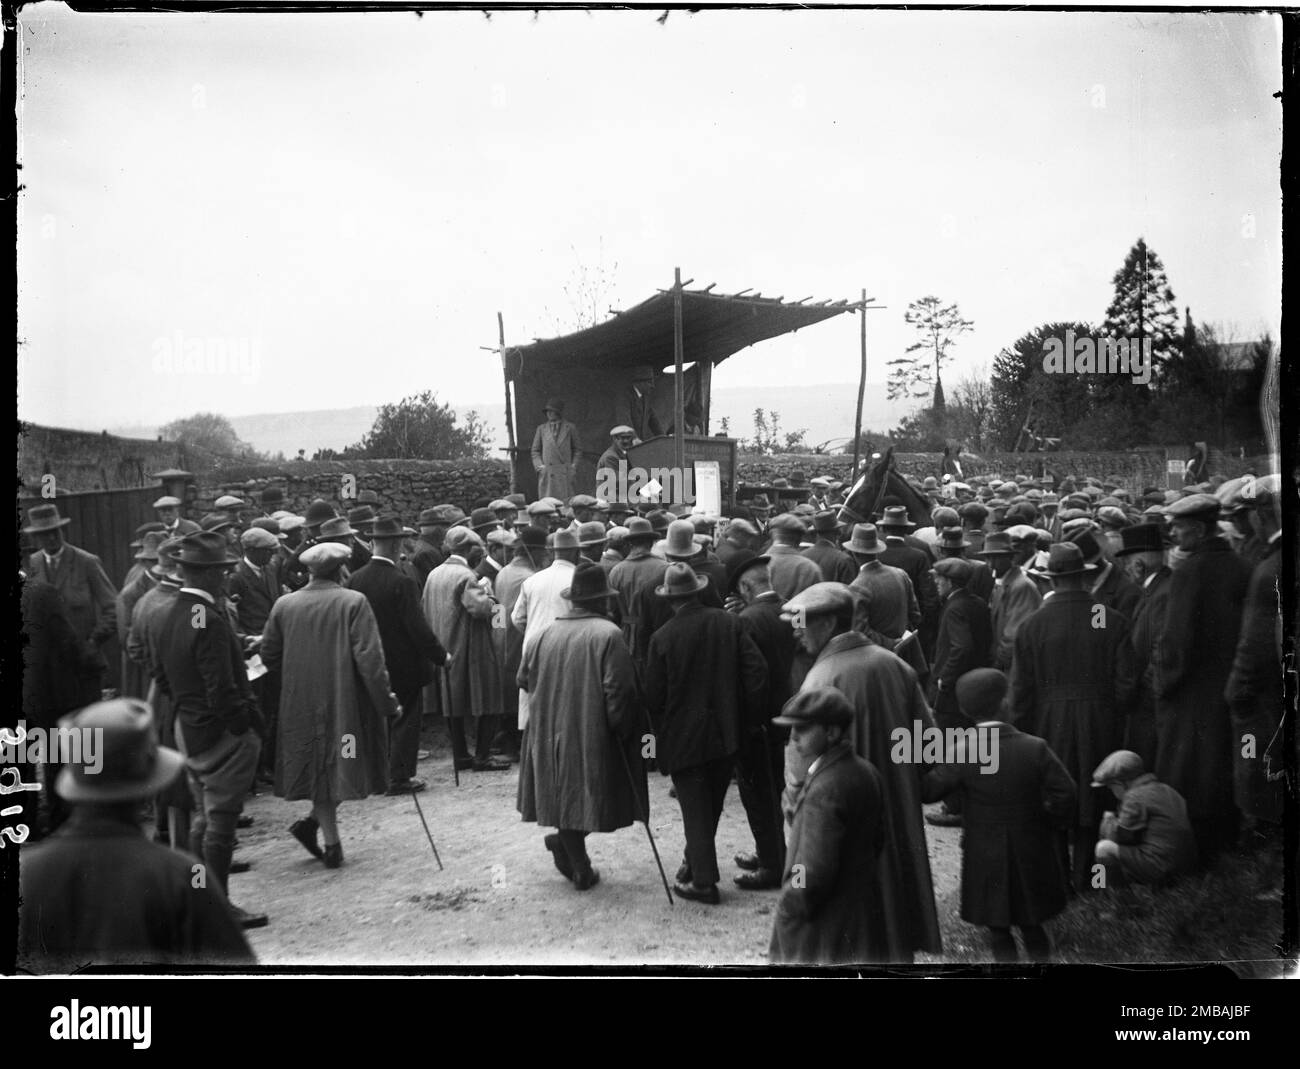 Stow-on-the-Wold, Cotswold, Gloucestershire, 1928. Looking over a crowd of men towards an auctioneers rostrum at the Stow Horse Fair, with a dark horse at the centre of the crowd. The auctioneers on the rostrum are from Cotswold auctioneers and valuers Tayler &amp; Fletcher. Stock Photo